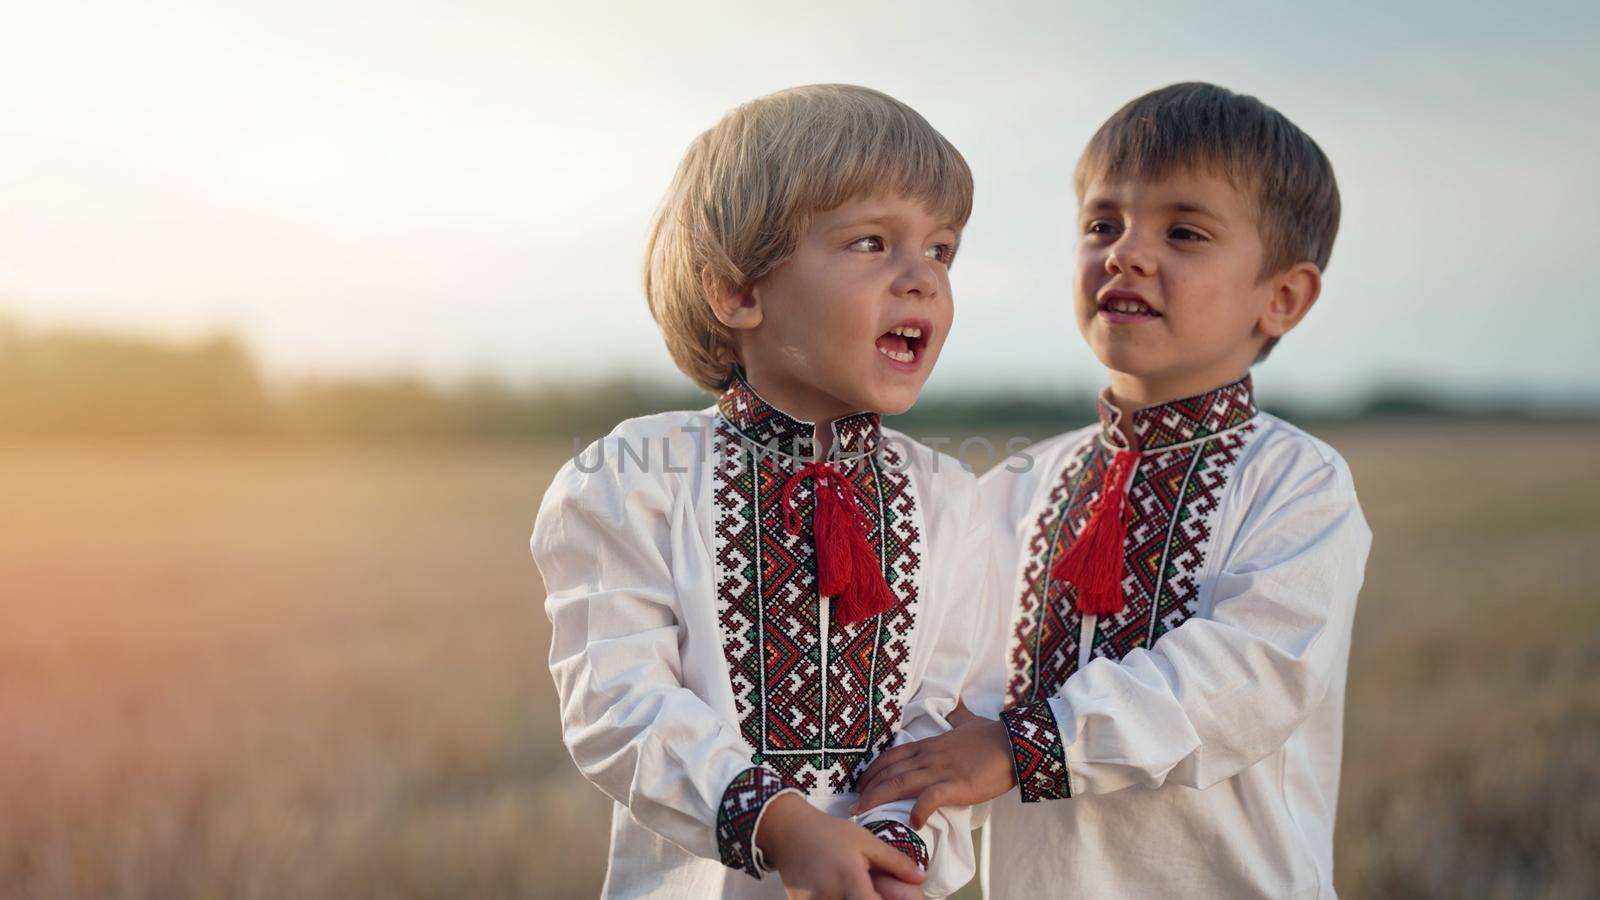 Beautiful portrait of little ukrainian boys singing song in wheat field after harvesting. Children in traditional embroidery vyshyvanka shirt. Ukraine, national costume, happy childhood future. photo